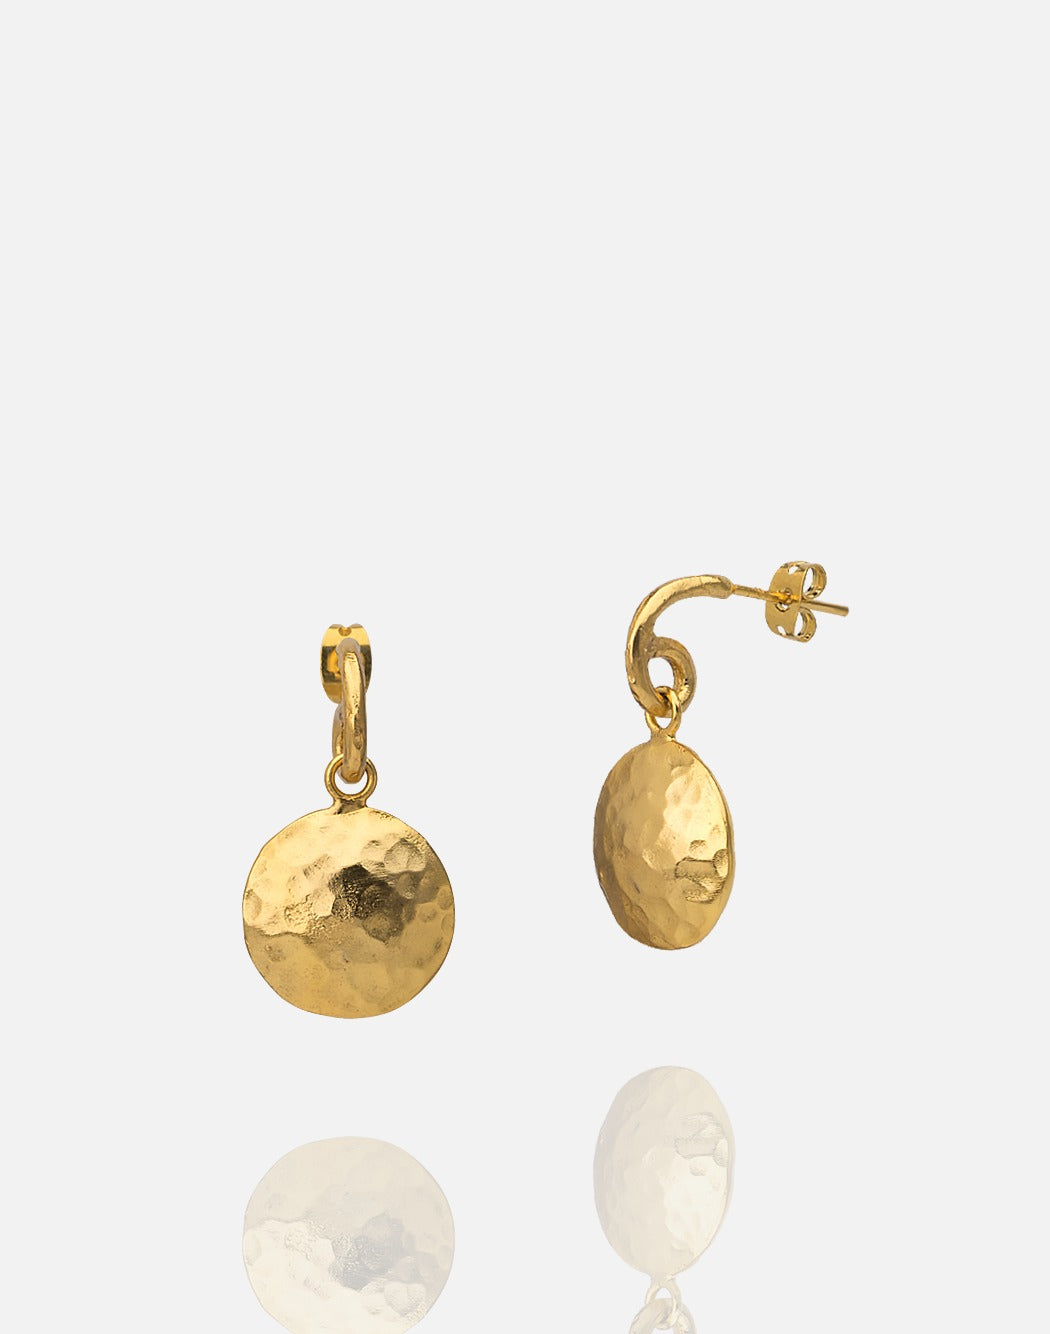 Hammered textured dangling earrings